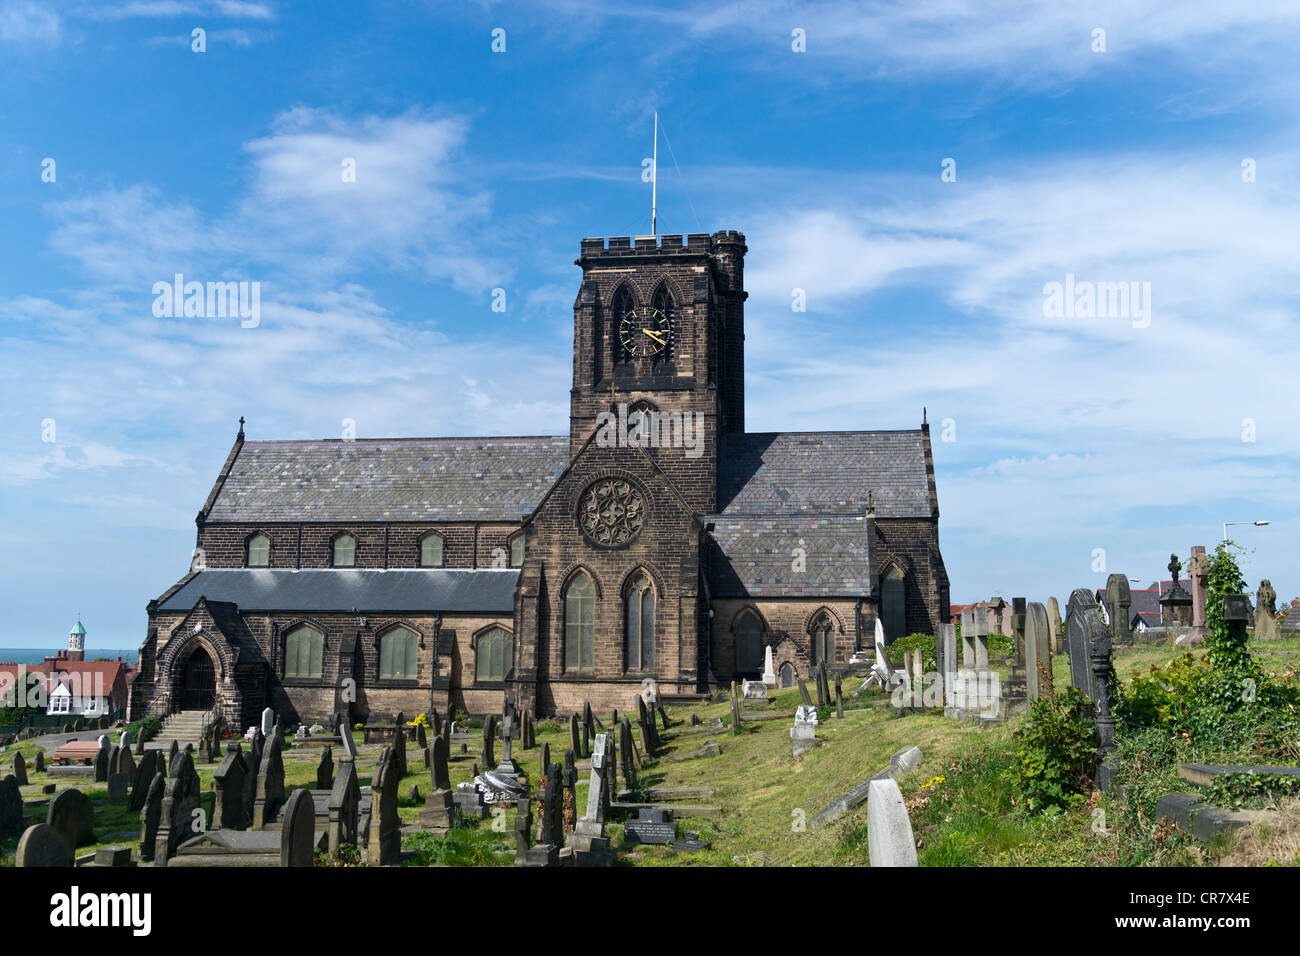 St Hilary's Church, Wallasey is in the town of Wallasey, Wirral, England. Stock Photo